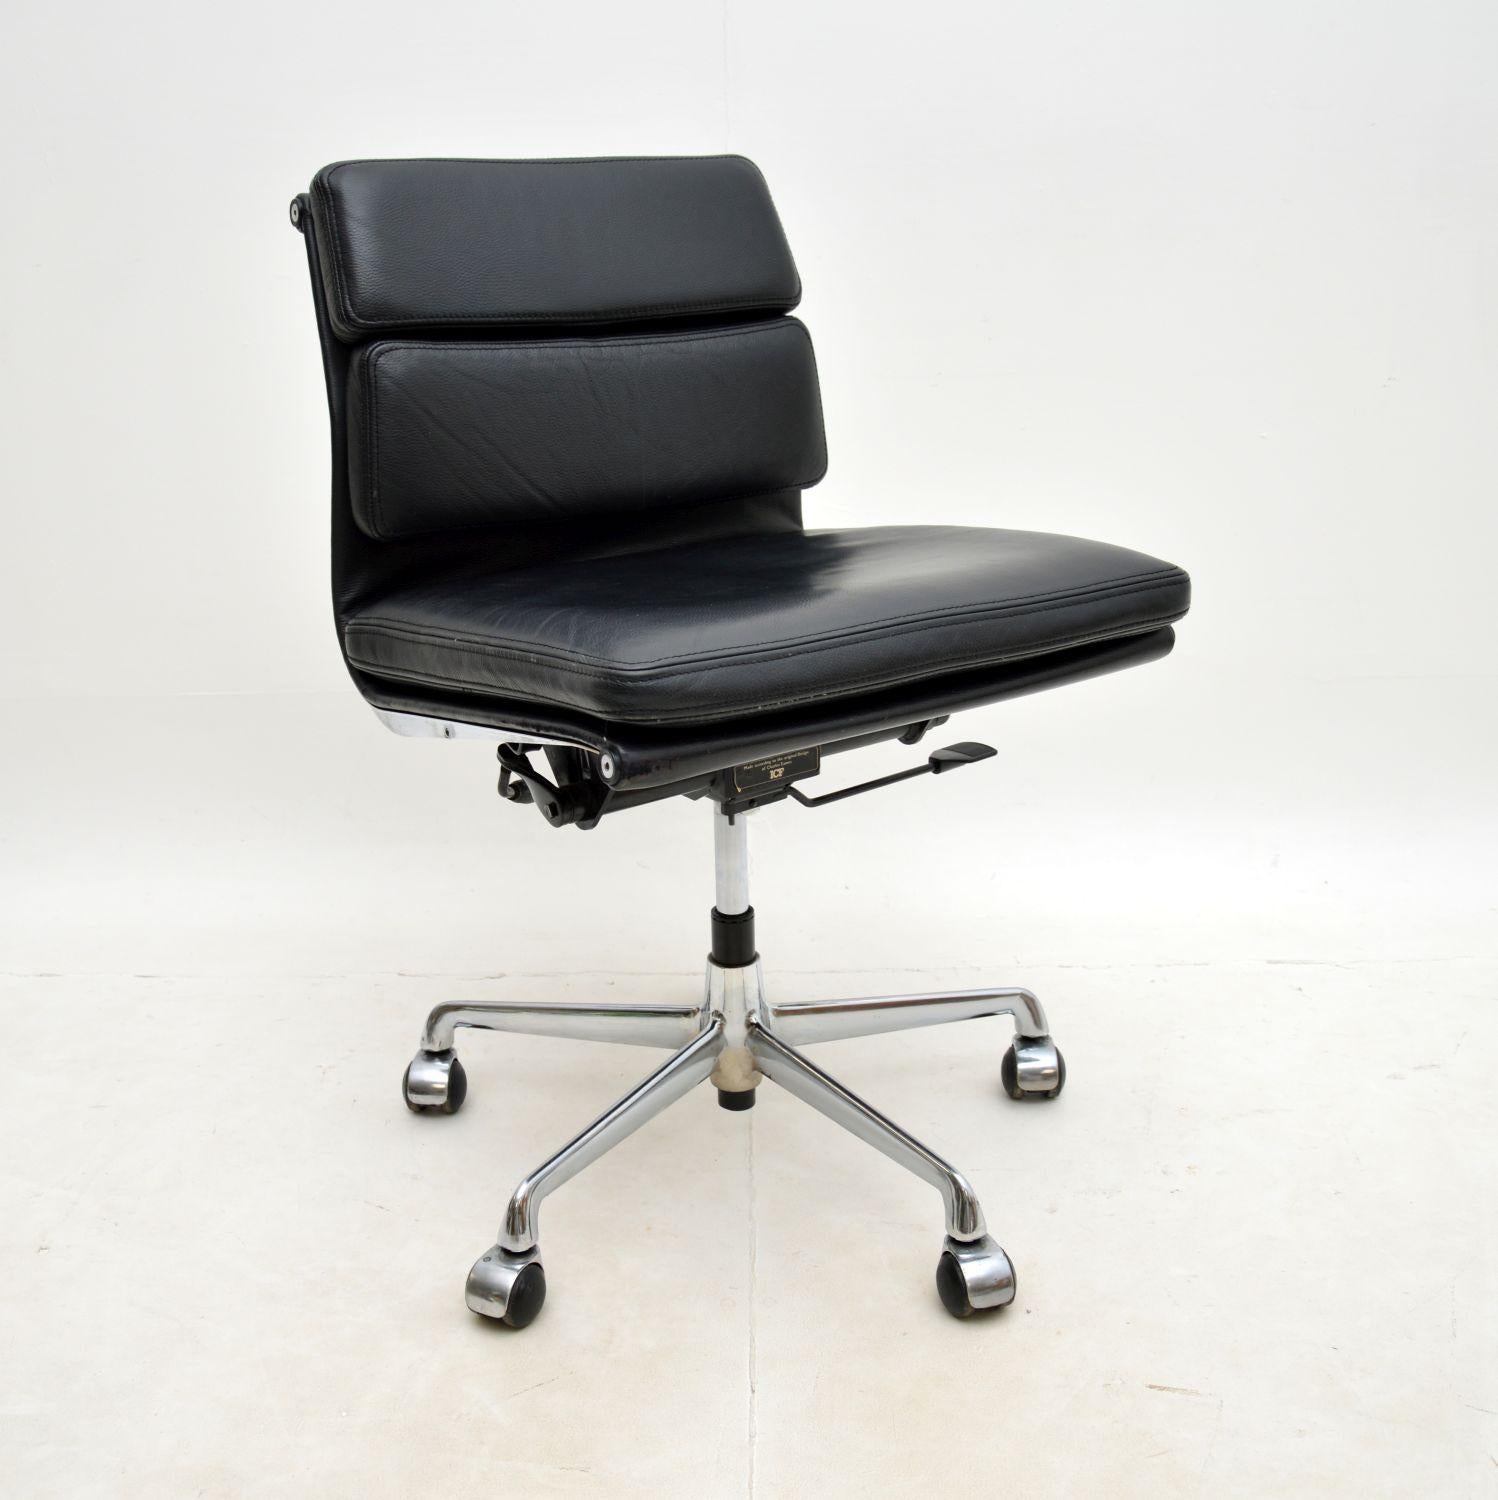 A stylish and iconic design, this is a vintage Eames soft pad leather desk chair by ICF. It was made in Italy by ICF who were one of the only compaines granted licence to manufacture genuine Eames chairs. This one dates from around the